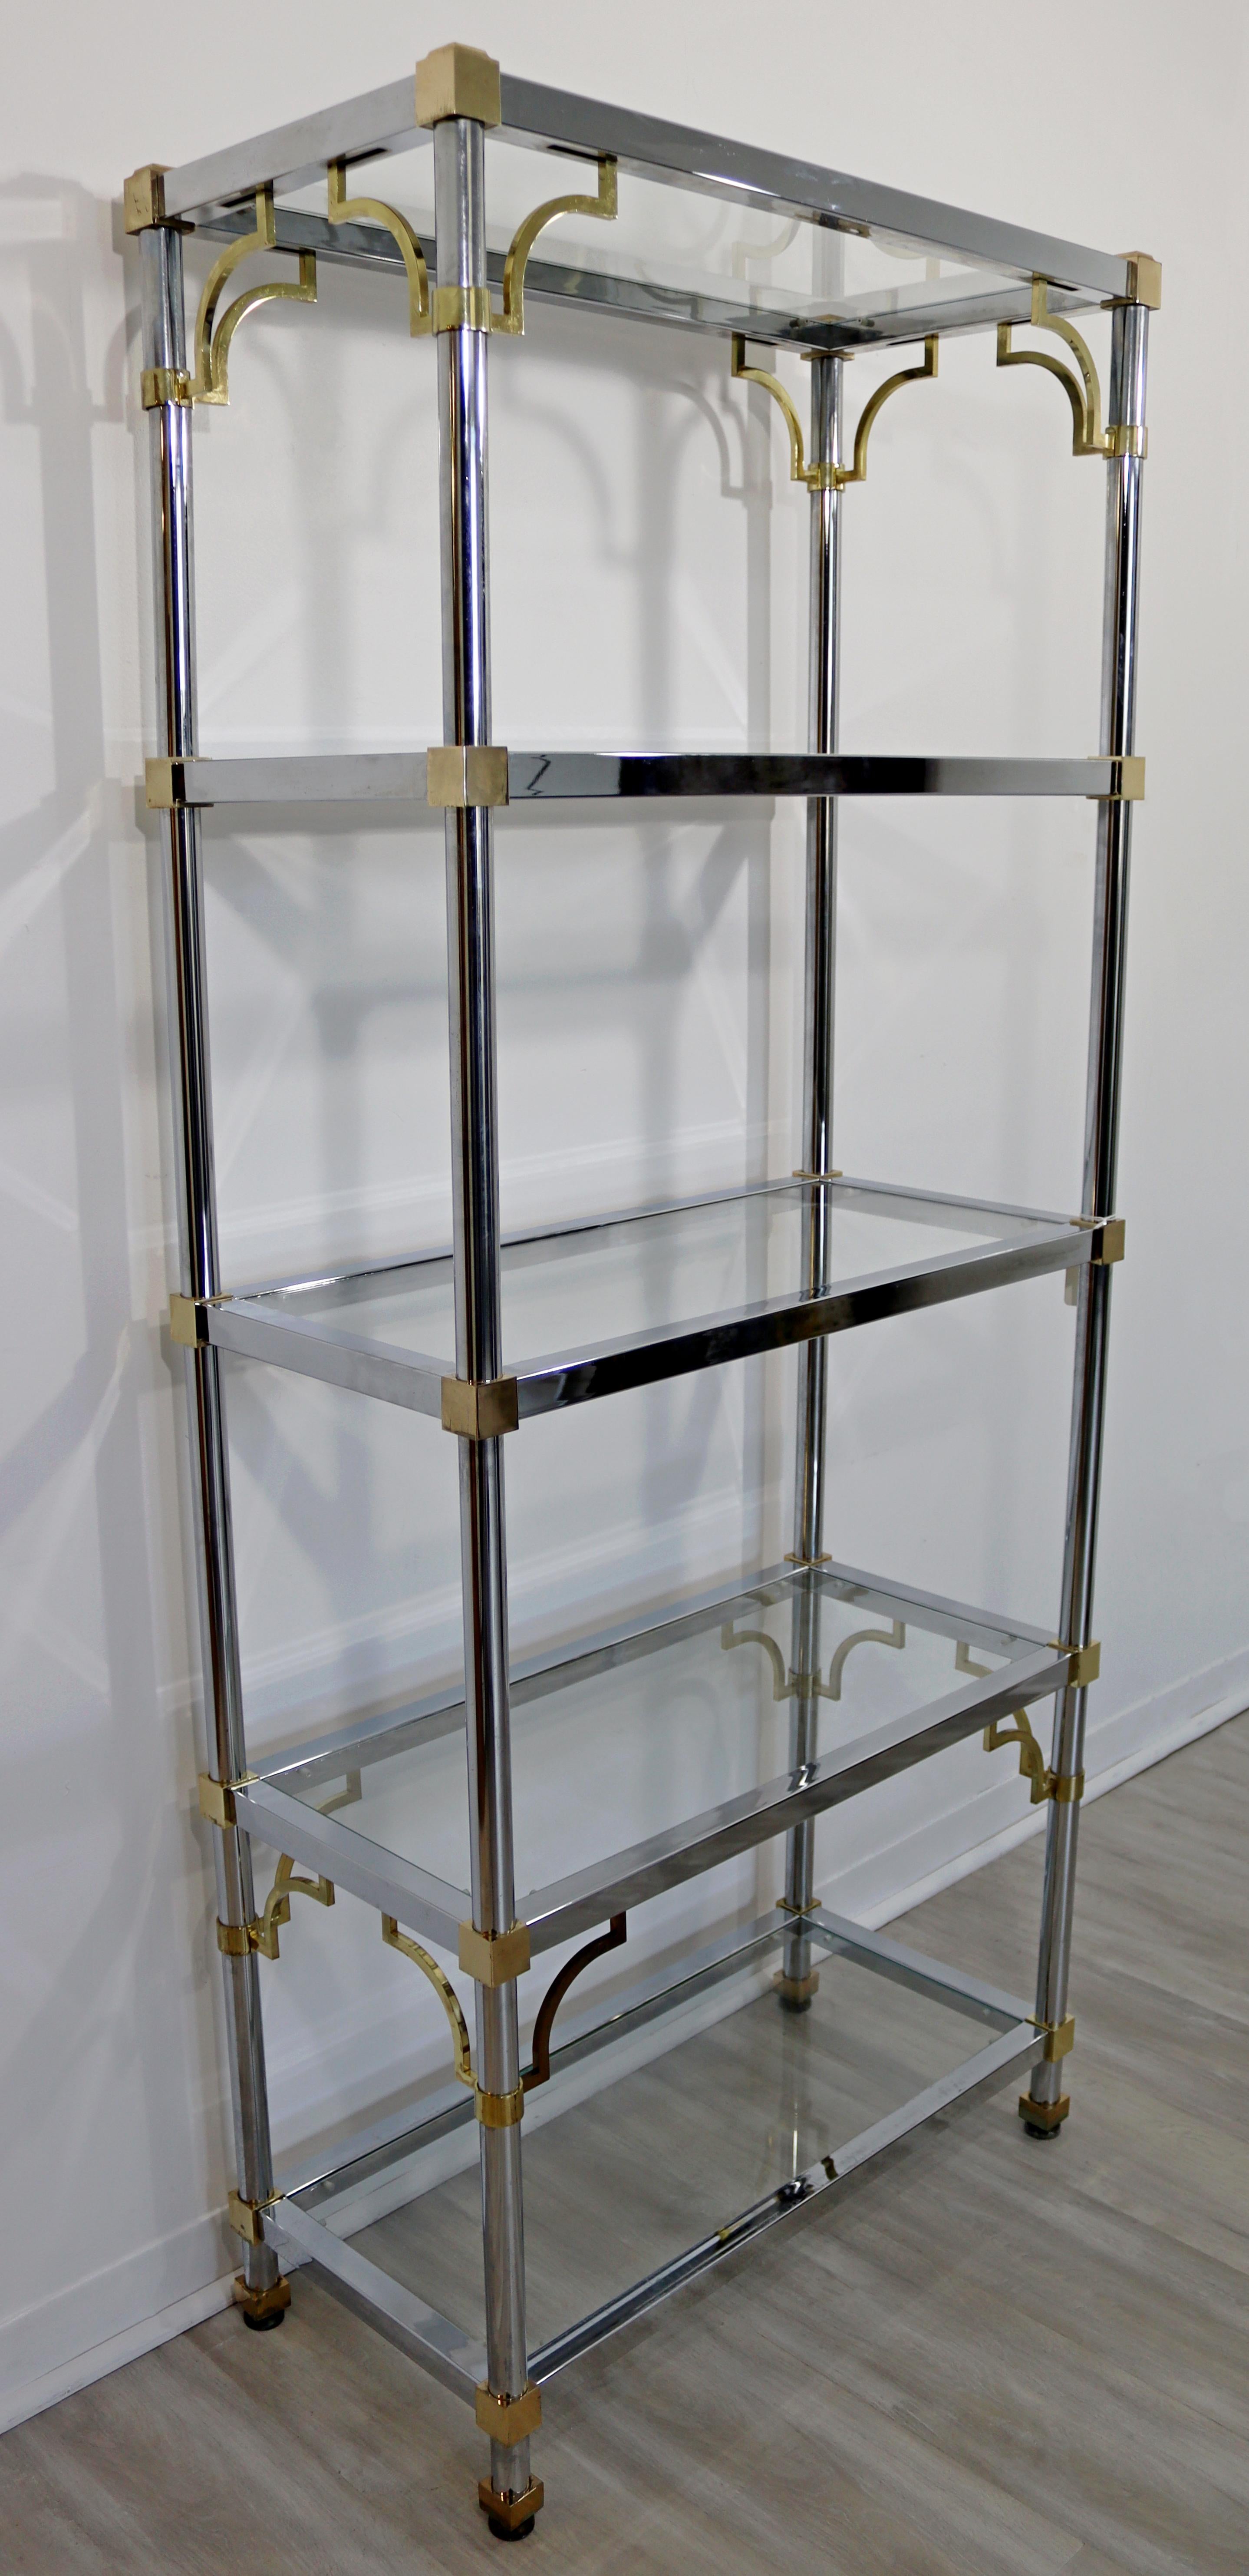 For your consideration is a marvelous, chrome and brass shelving unit etagere, with five glass shelves, by Maison Jansen, circa the 1960s. In very good vintage condition. The dimensions are 31